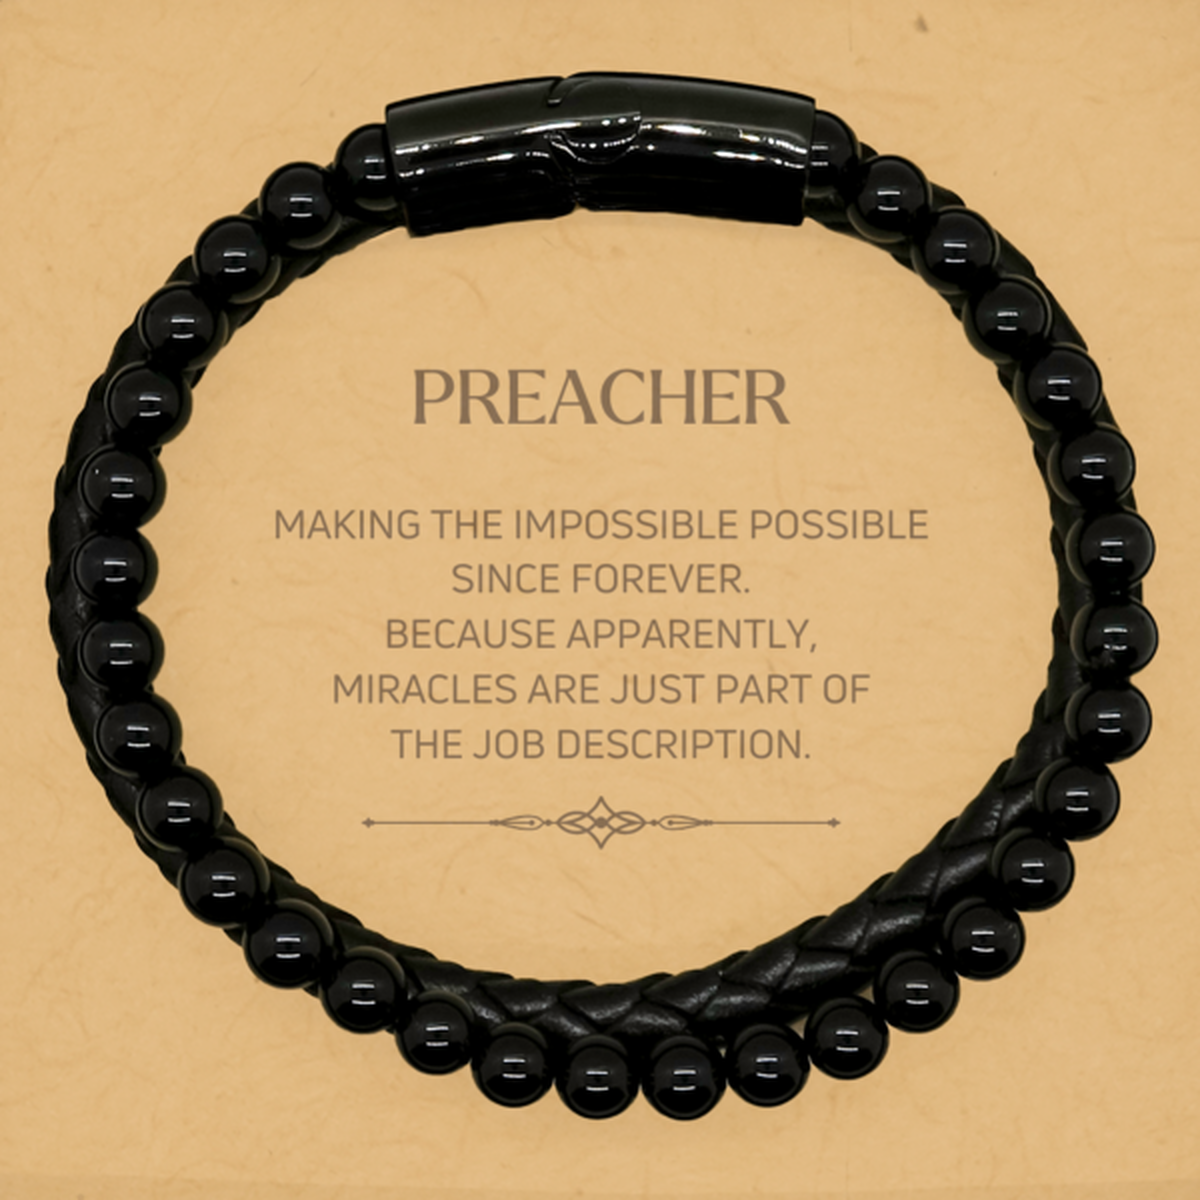 Funny Preacher Gifts, Miracles are just part of the job description, Inspirational Birthday Stone Leather Bracelets For Preacher, Men, Women, Coworkers, Friends, Boss